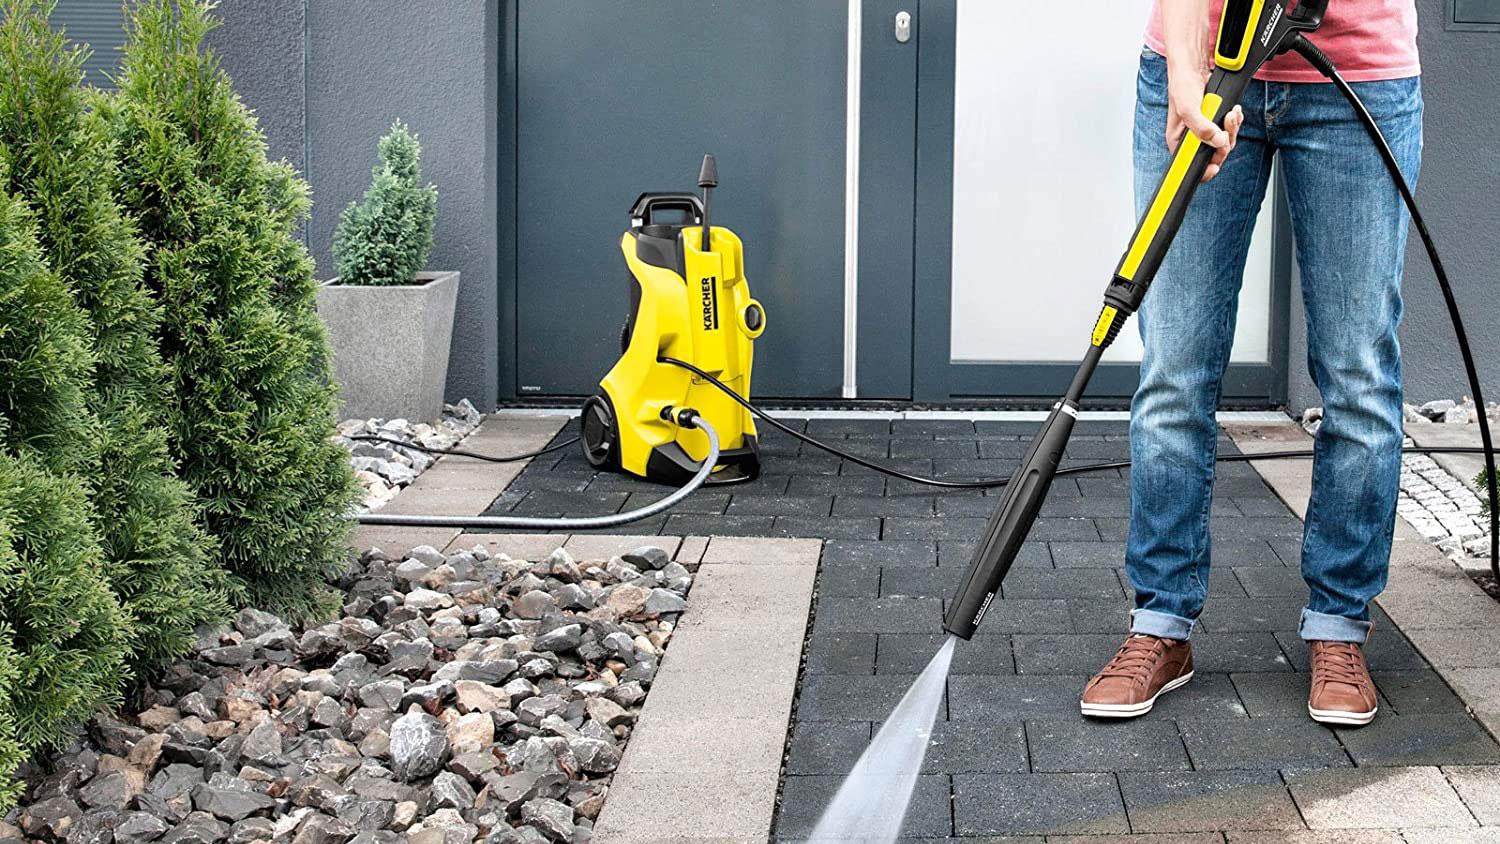 Pressure Washer Manual – Read Before Using A Pressure Washer